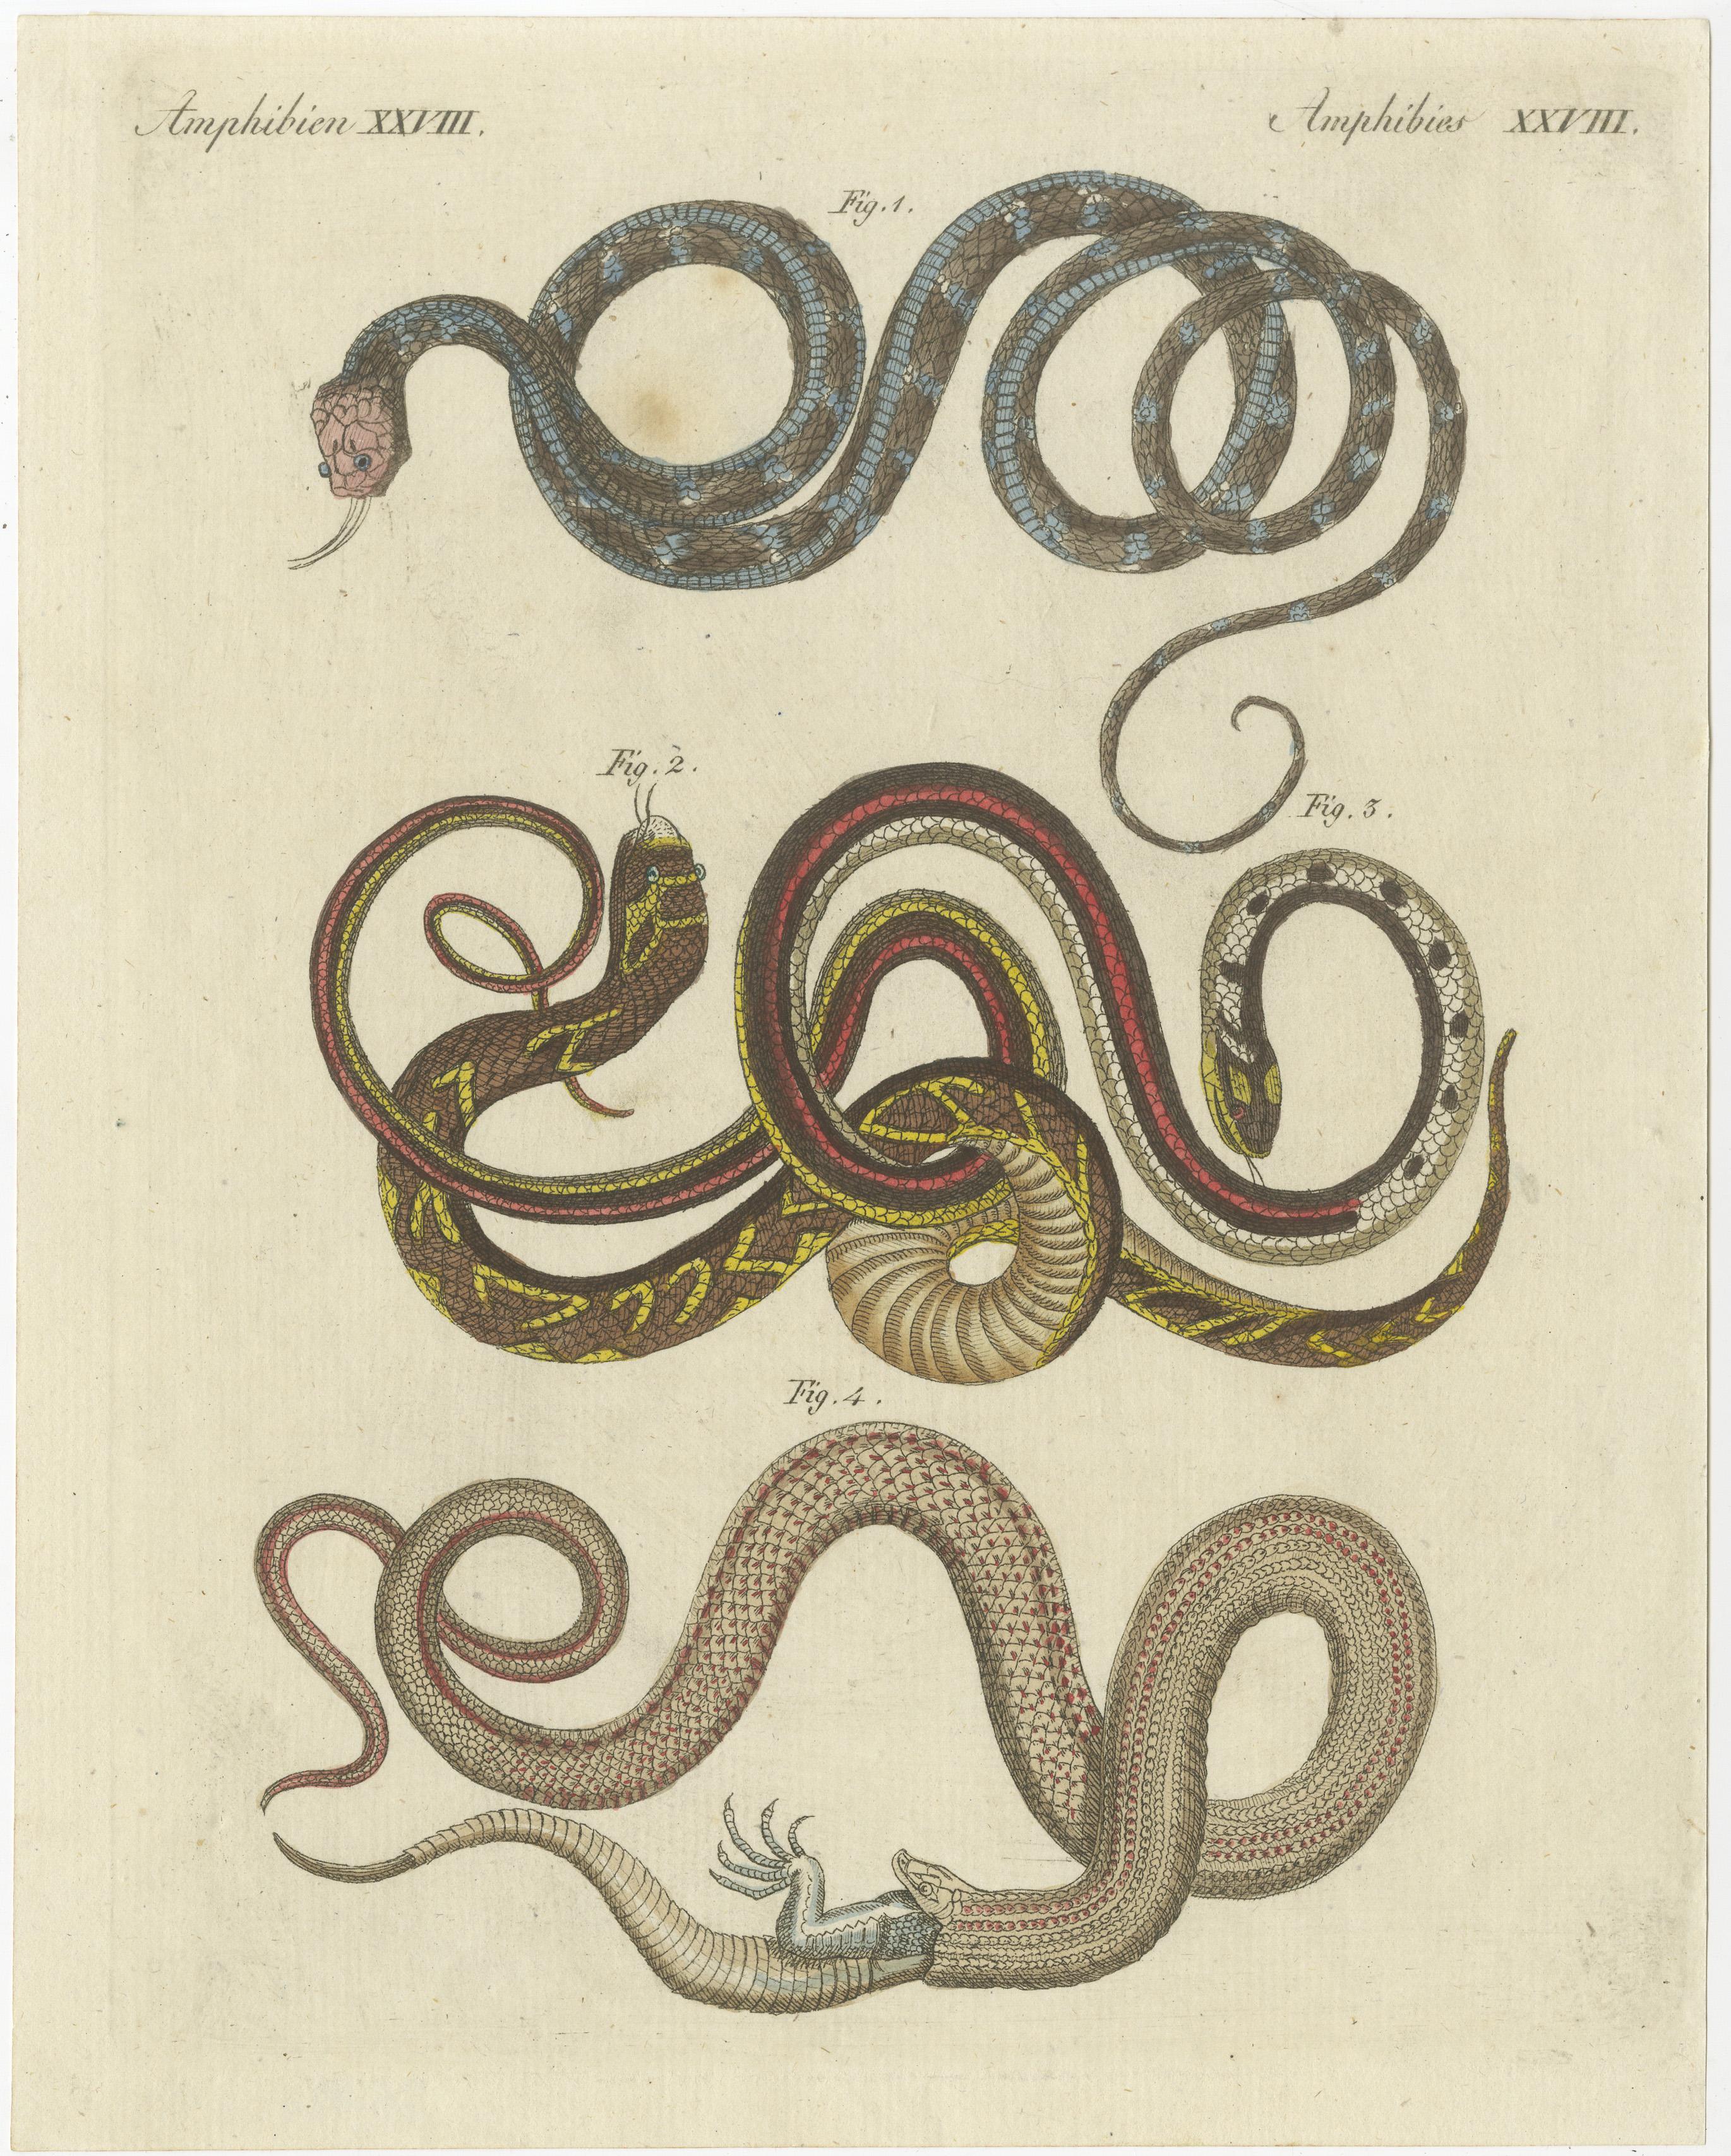 Antique print of various snakes including the buff striped keelback snake. This print originates from 'Bilderbuch fur Kinder' by F.J. Bertuch. Friedrich Johann Bertuch (1747-1822) was a German publisher and man of arts most famous for his 12-volume